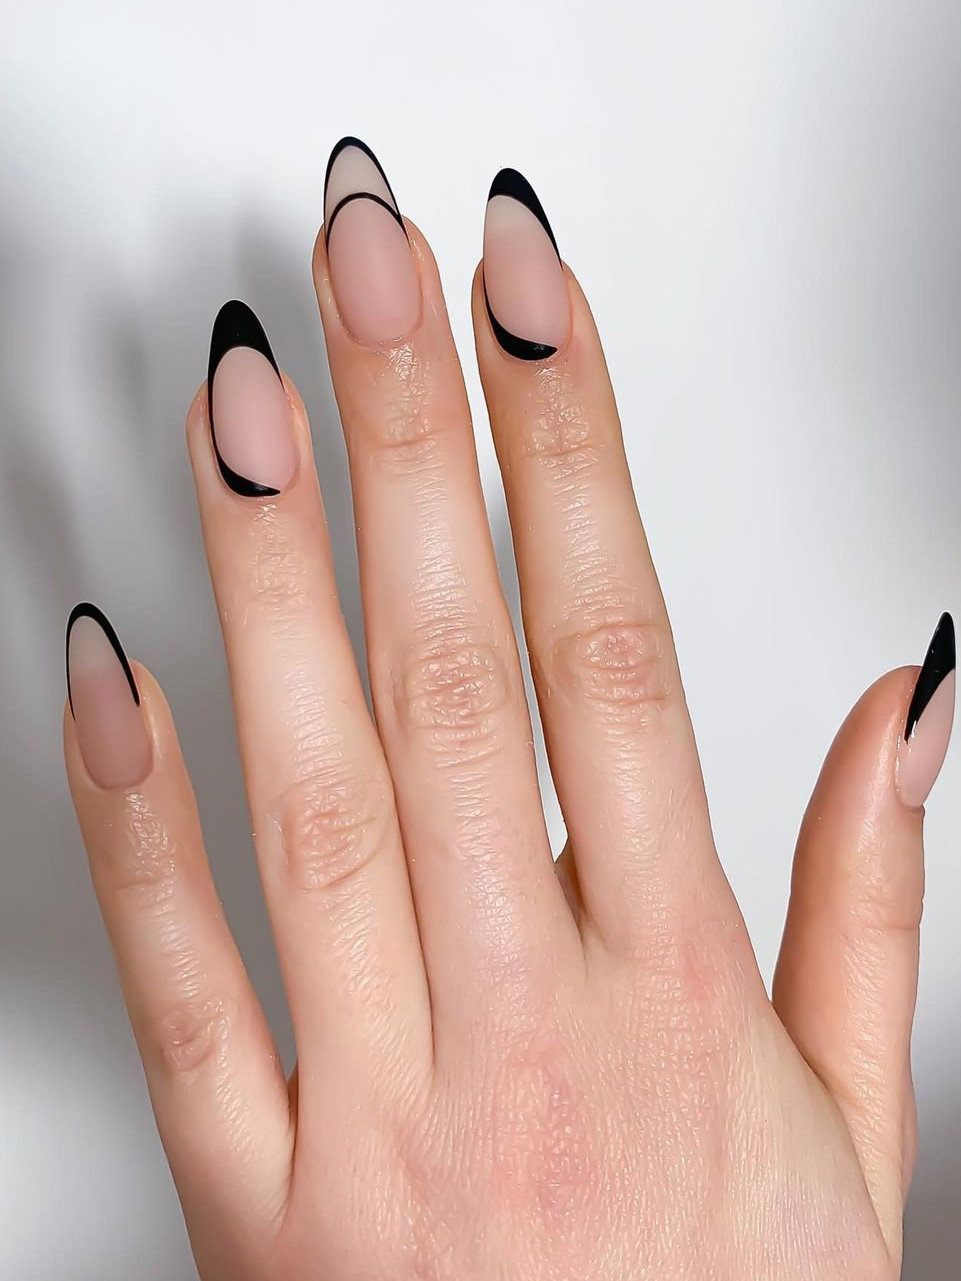 Black Acrylic Nail Ideas With Negative Space